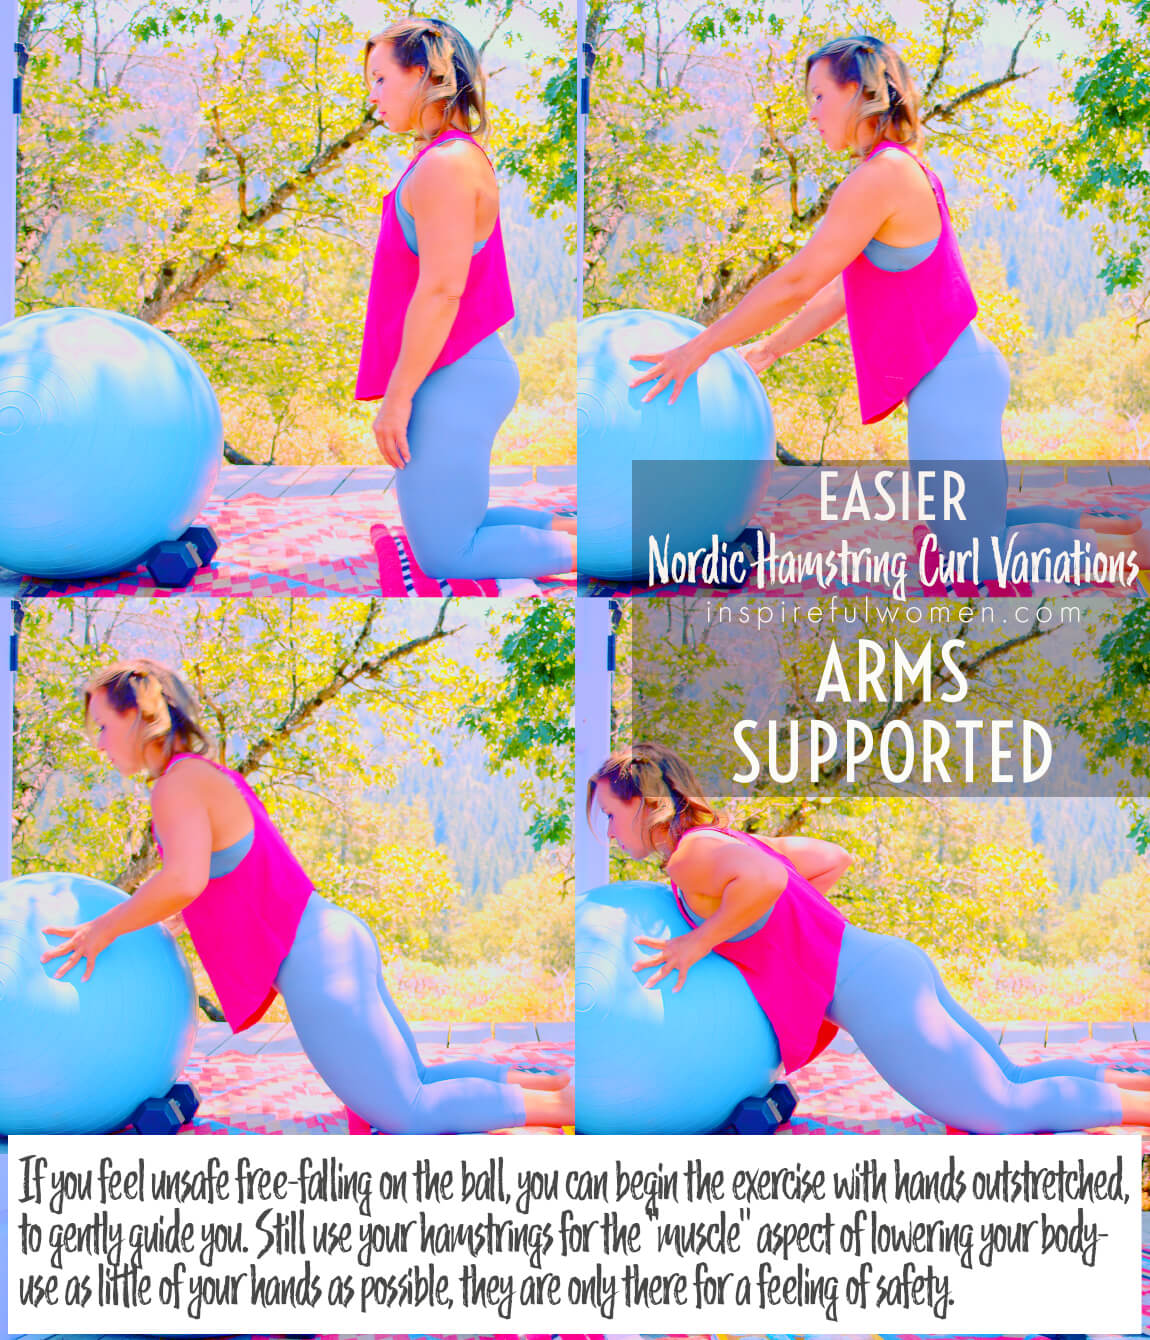 arms-supported-eccentric-nordic-hamstring-curl-at-home-variation-easier